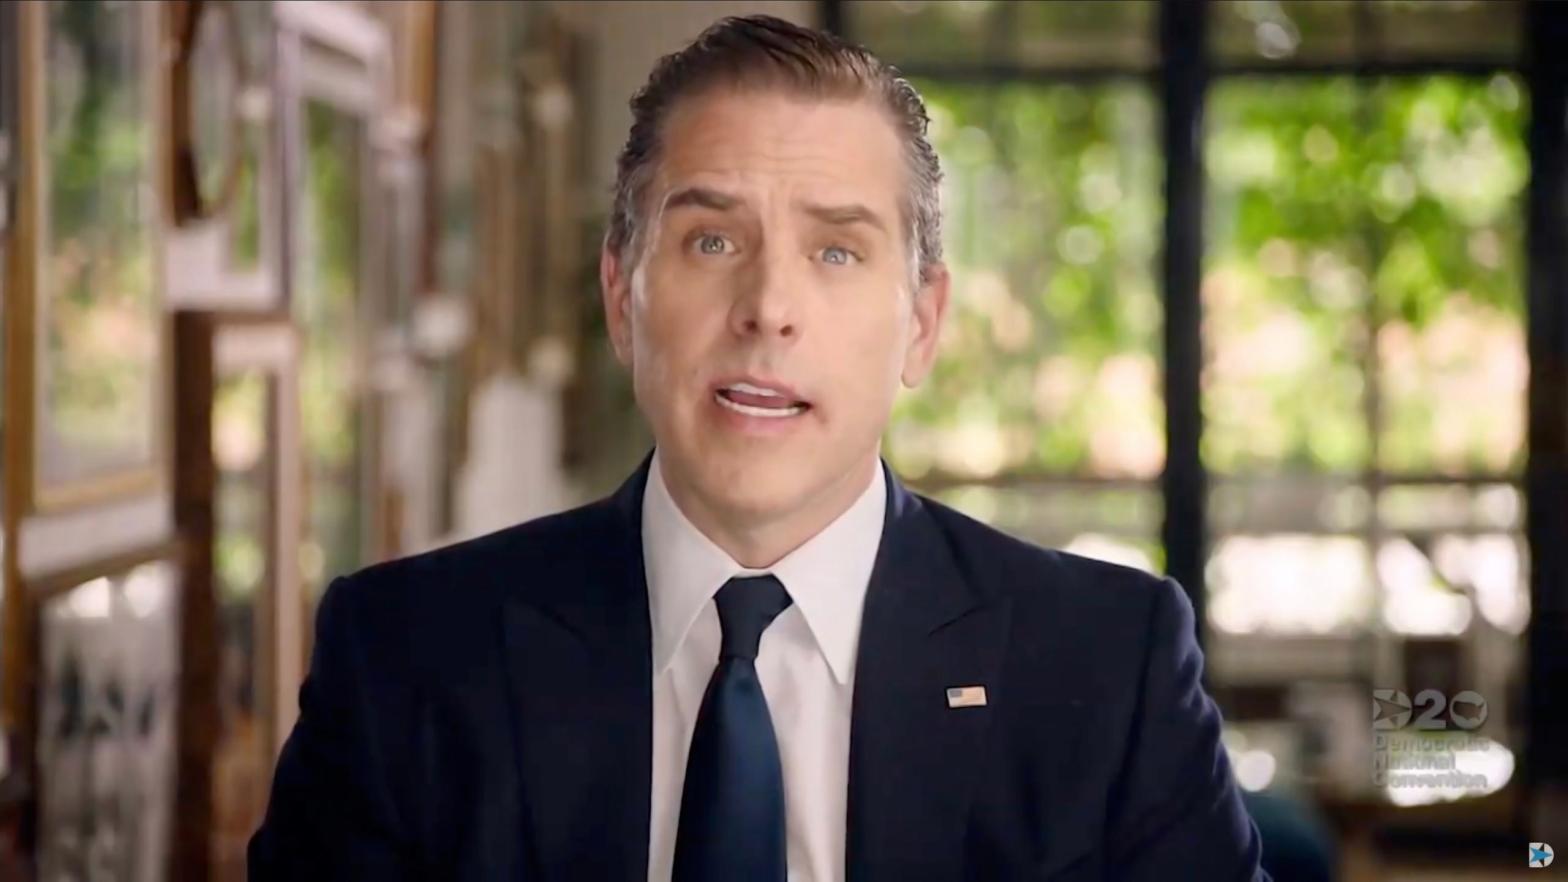 In this screenshot from the DNCC's livestream of the 2020 Democratic National Convention, Hunter Biden, son of Democratic presidential nominee Joe Biden, addresses the virtual convention on August 20, 2020.  (Photo: DNCC, Getty Images)